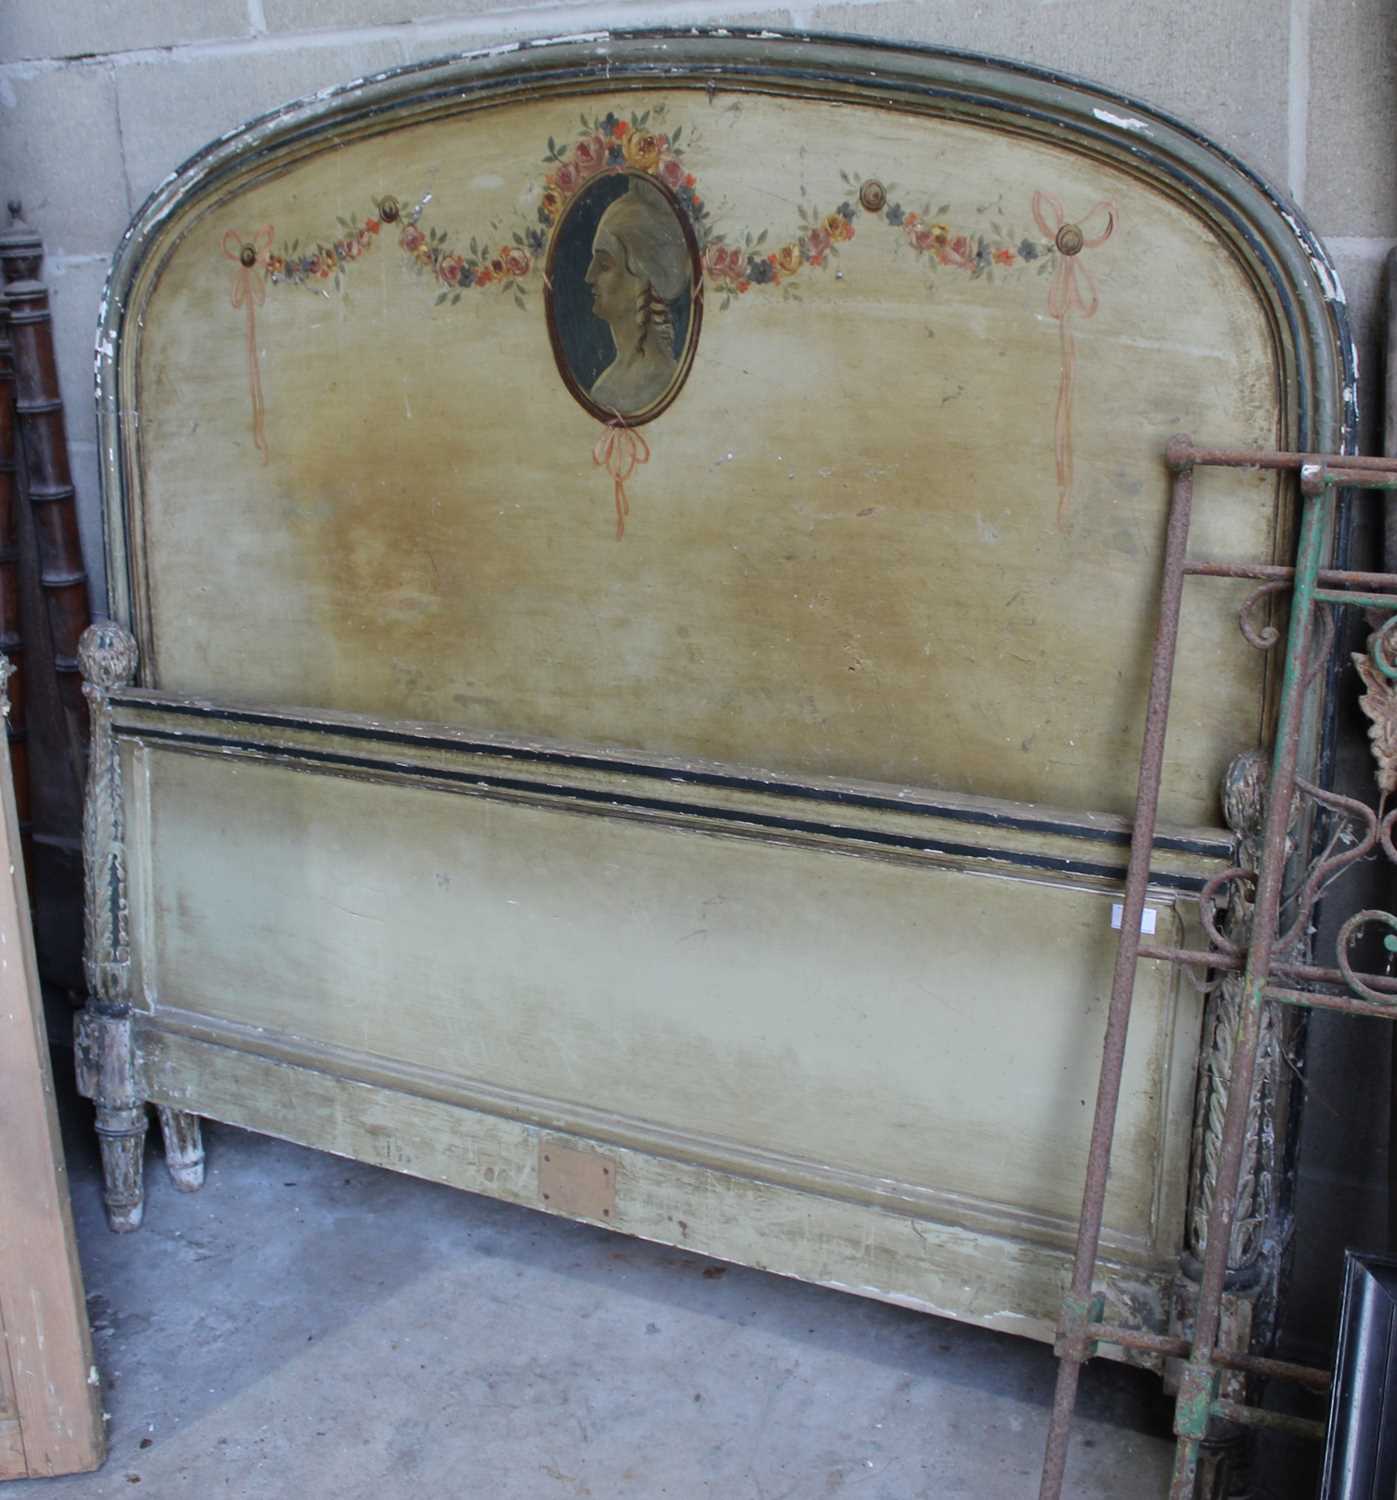 Lot 3 - Late 19th / early 20th century Continental polychrome painted headboard and footboard, painted with 18th century style profile portrait and with ornately carved terminals, 142cm wide